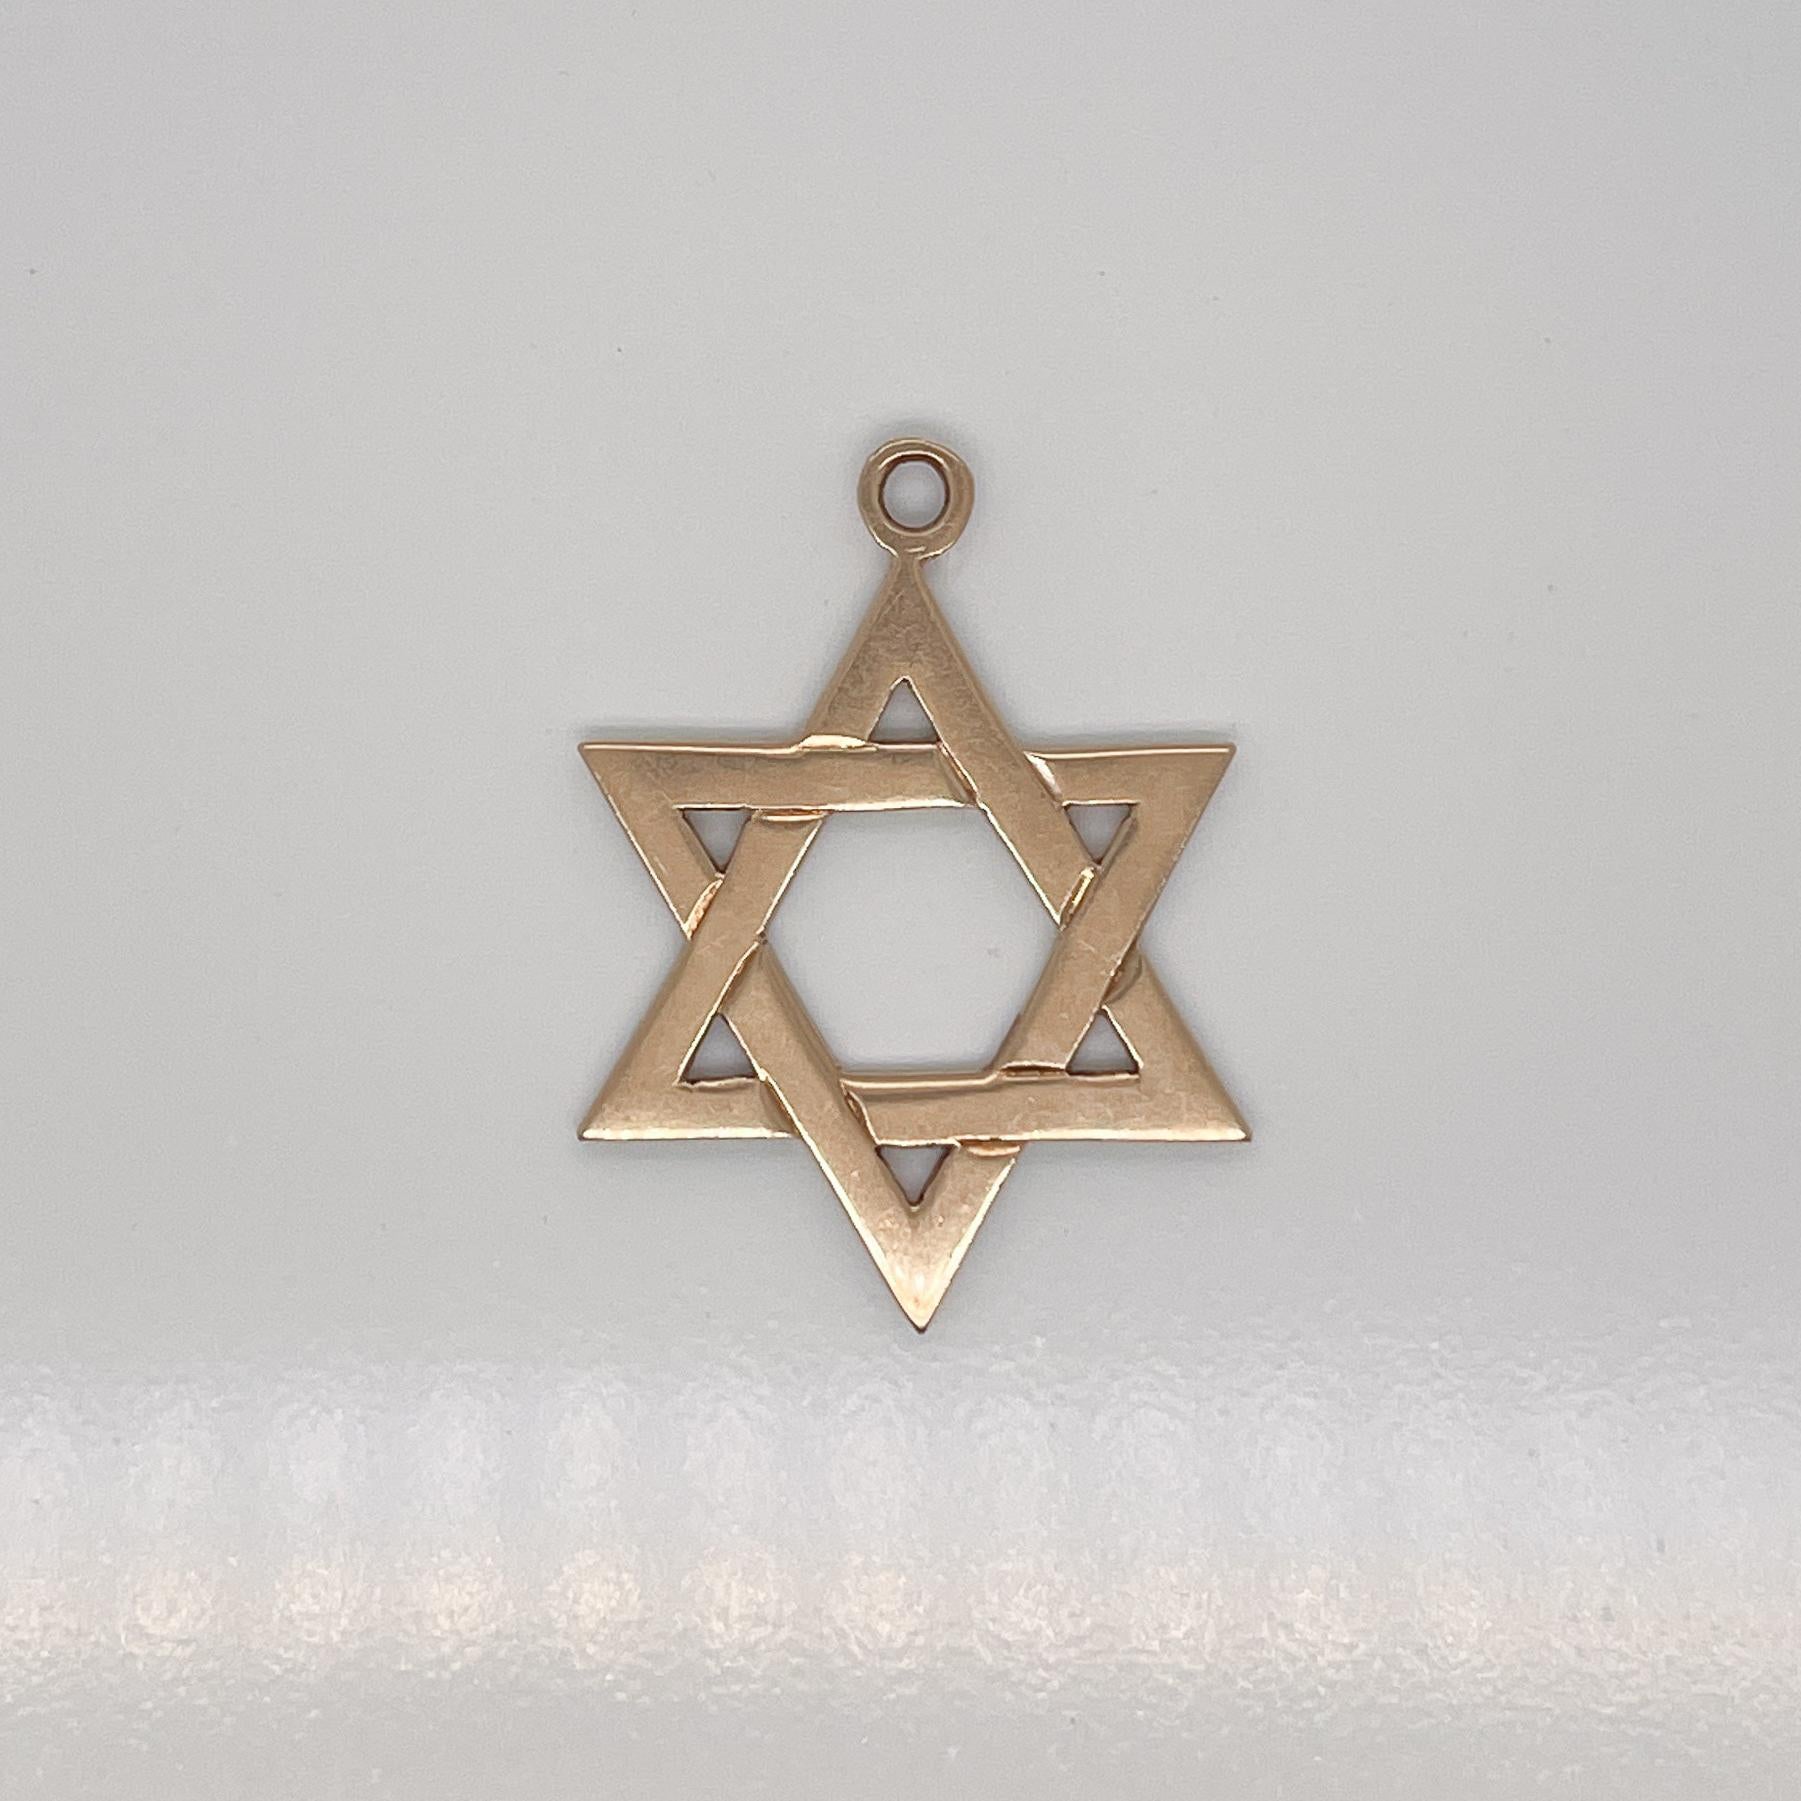 A vintage 14 karat gold charm for a charm bracelet. 

In the form of the Star of David.

A rare and terrific charm!

Date:
Mid-20th Century

Overall Condition:
It is in overall good, as-pictured, used estate condition with some very fine & light